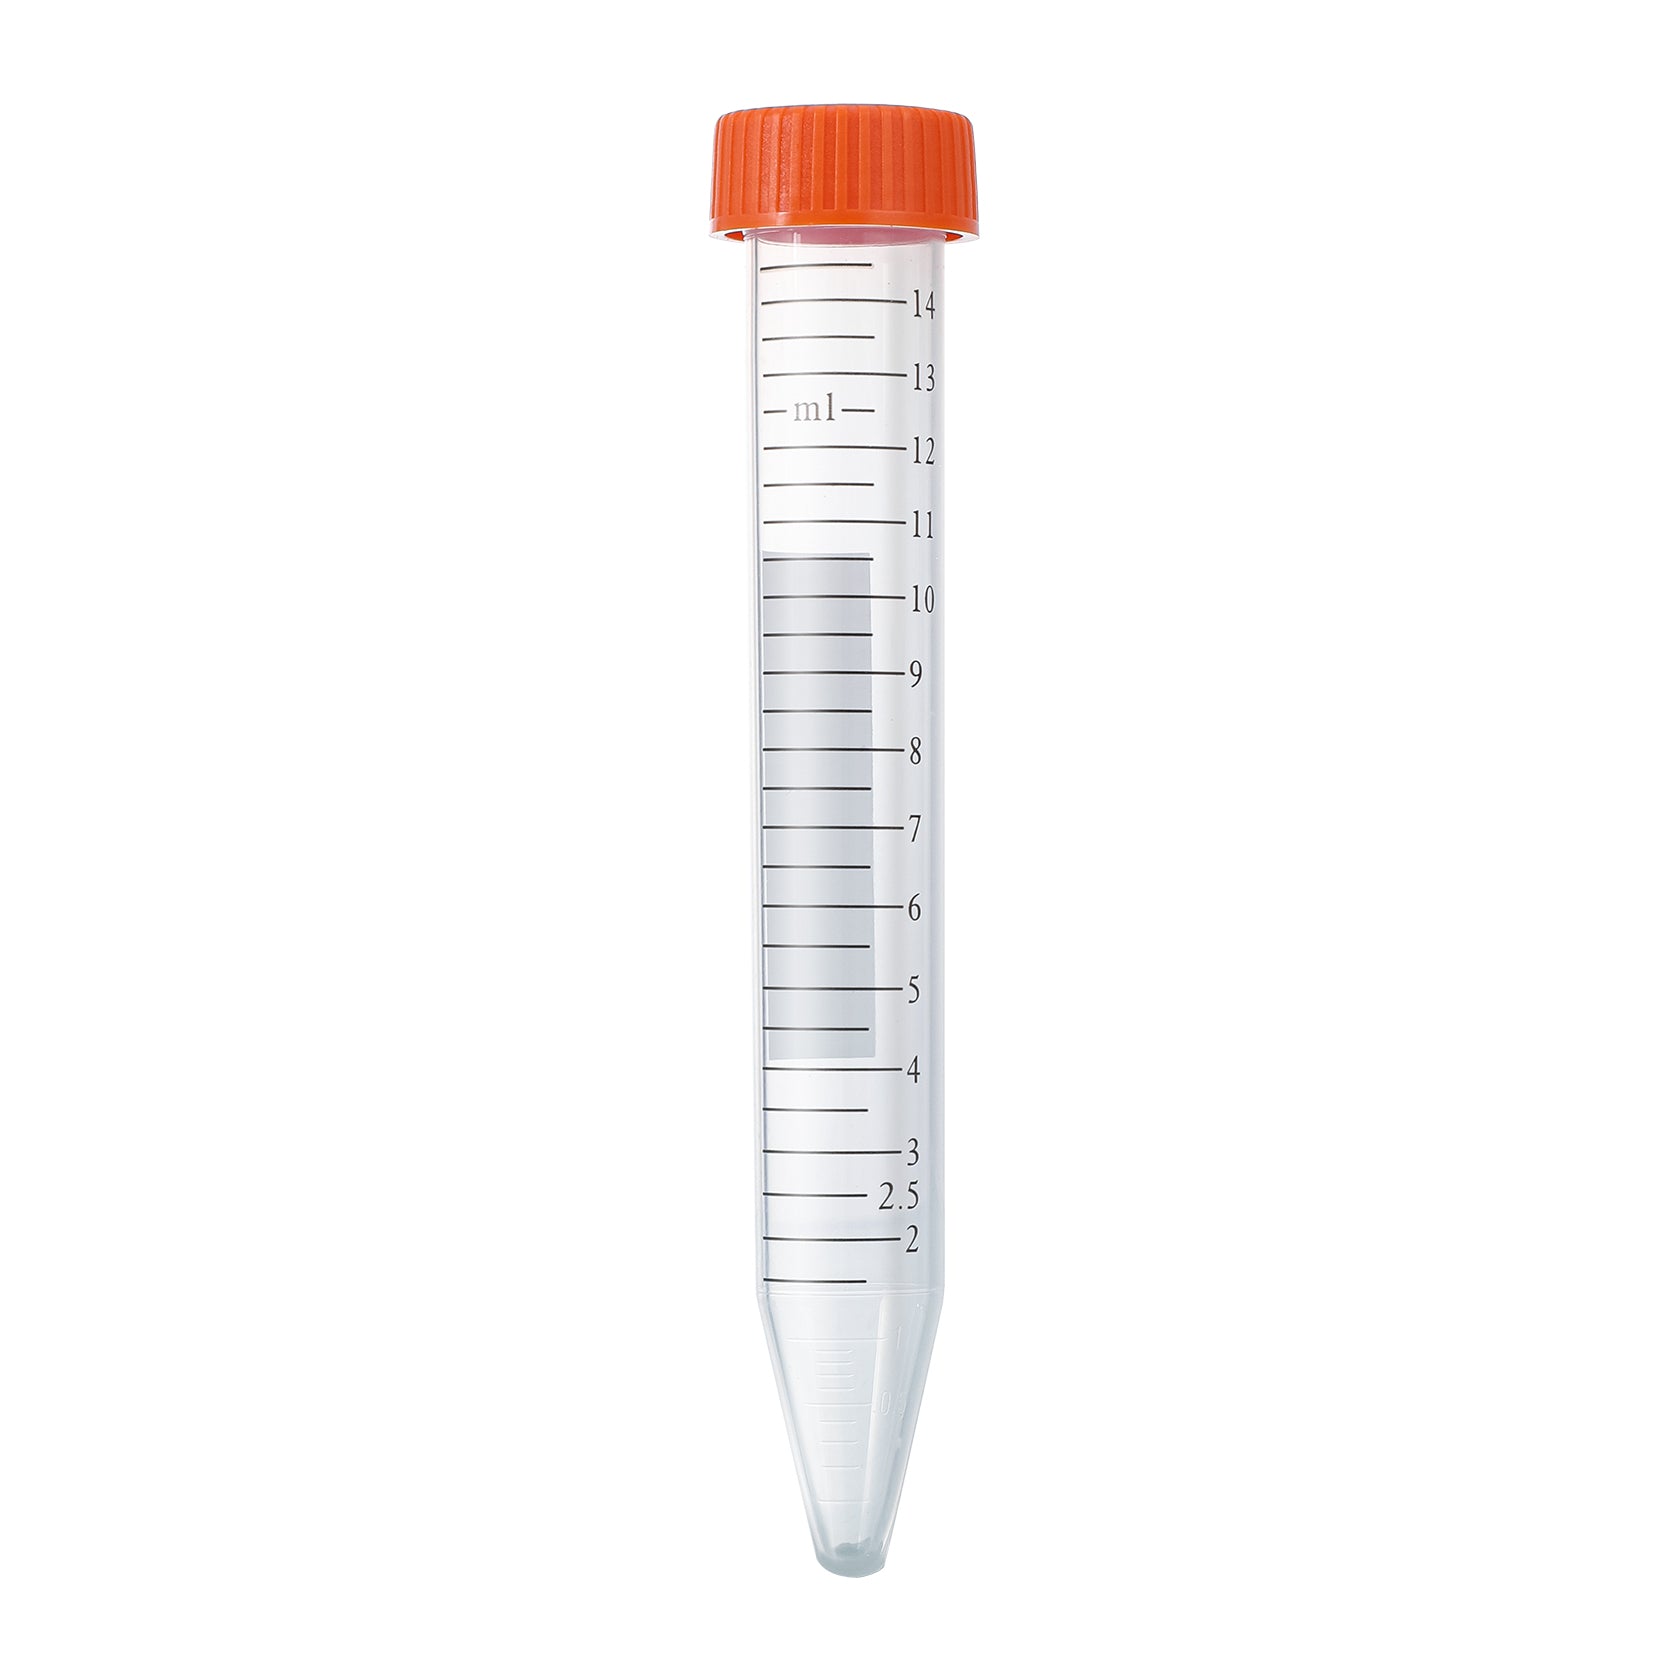 Benchmark C1005-T5 - Clear Centrifuge Tube, 5ml, 200 Pack (2 Bags of 100) |  TEquipment